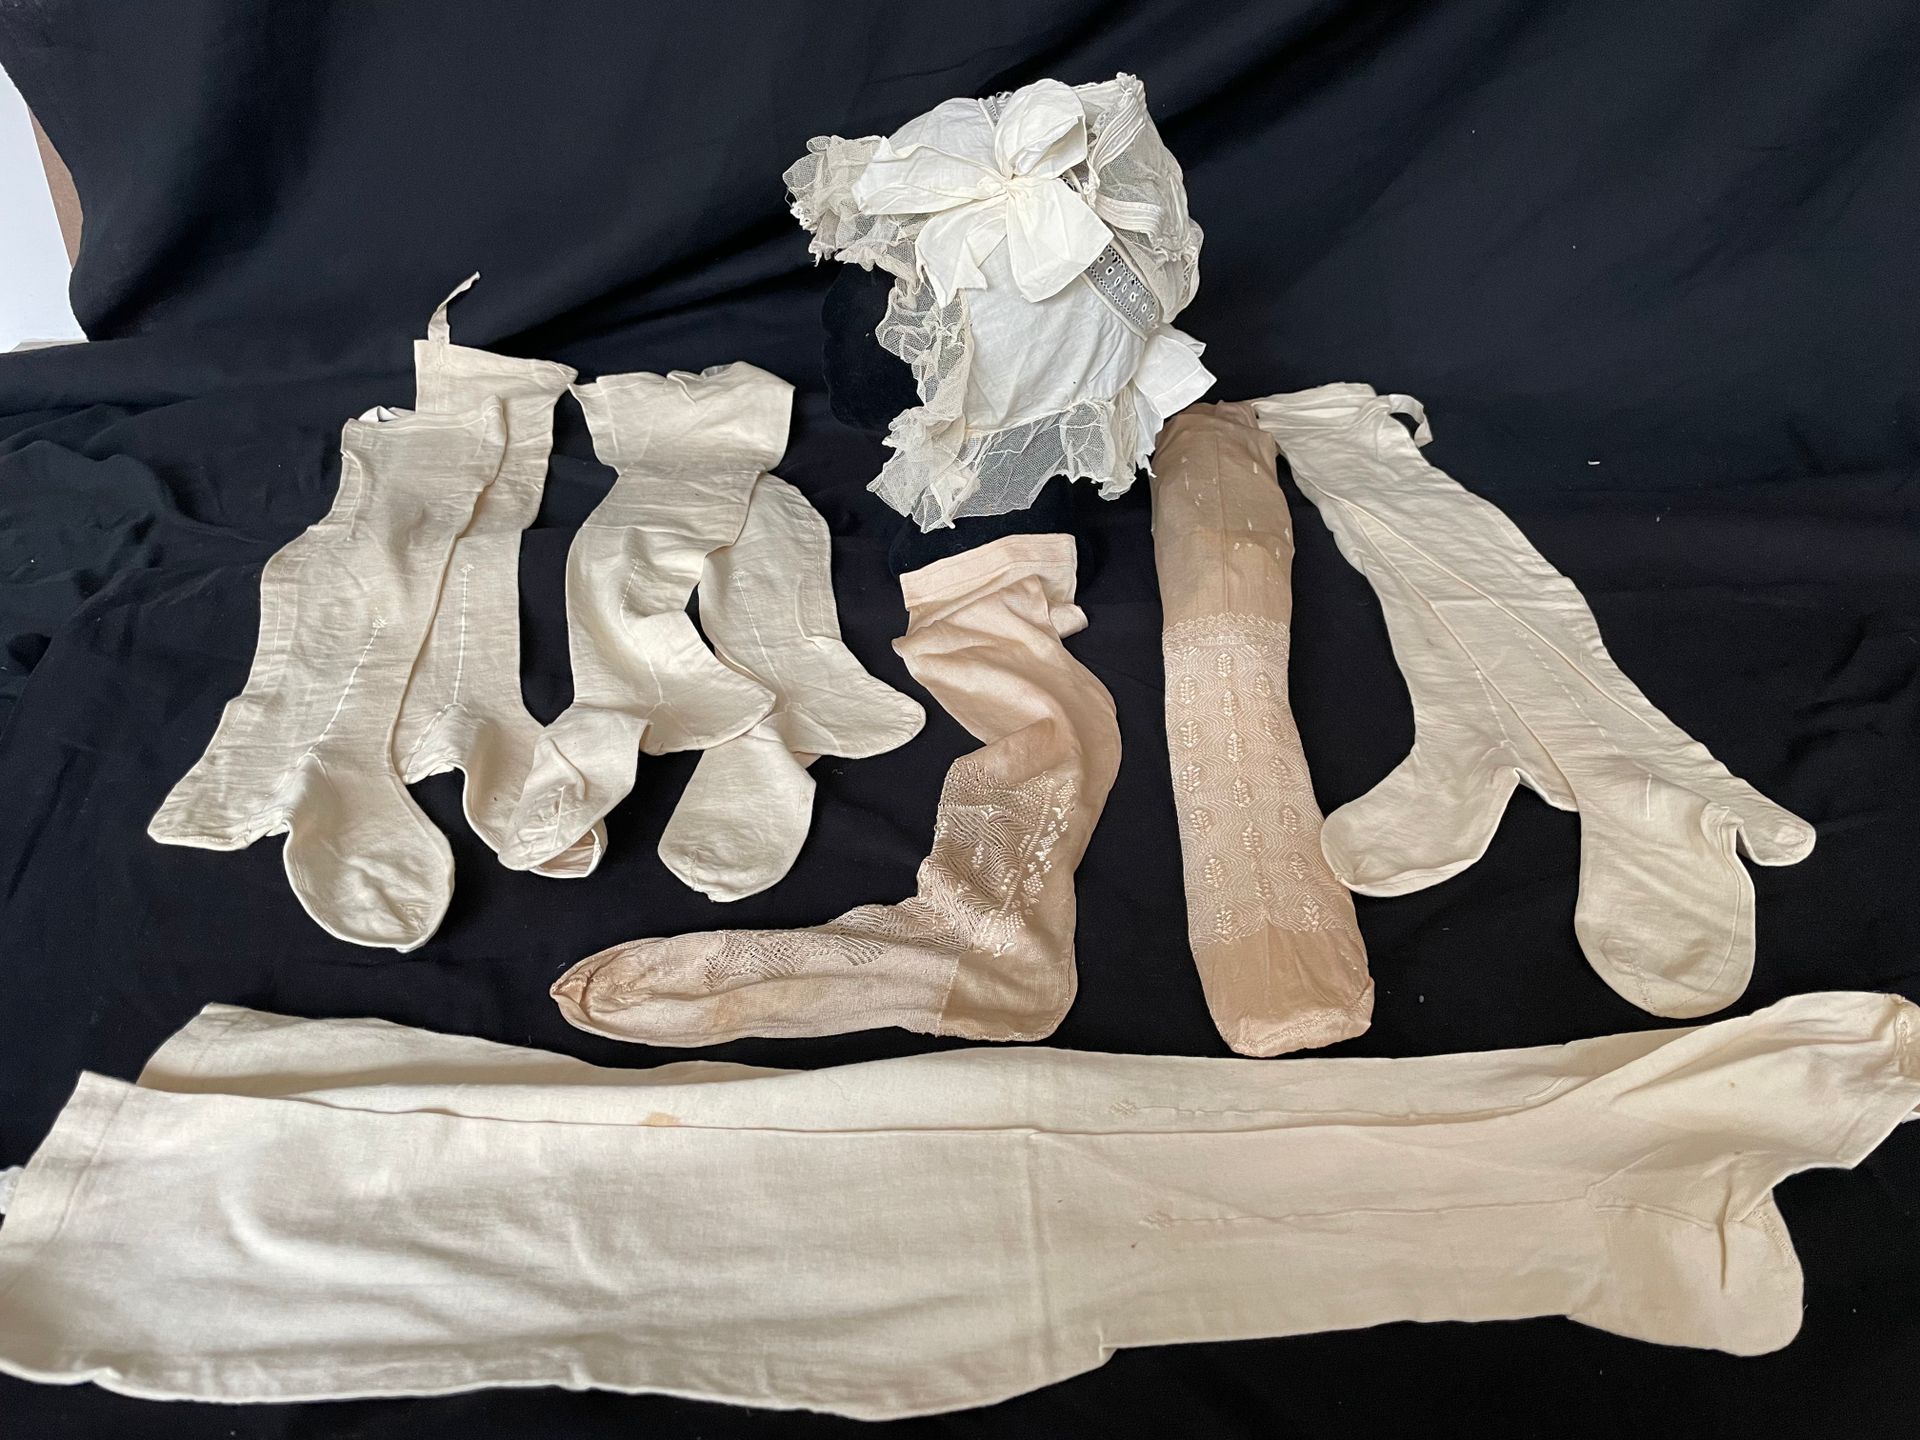 Null Set of stockings in silk or cotton knit, early 19th century.
Including a ni&hellip;